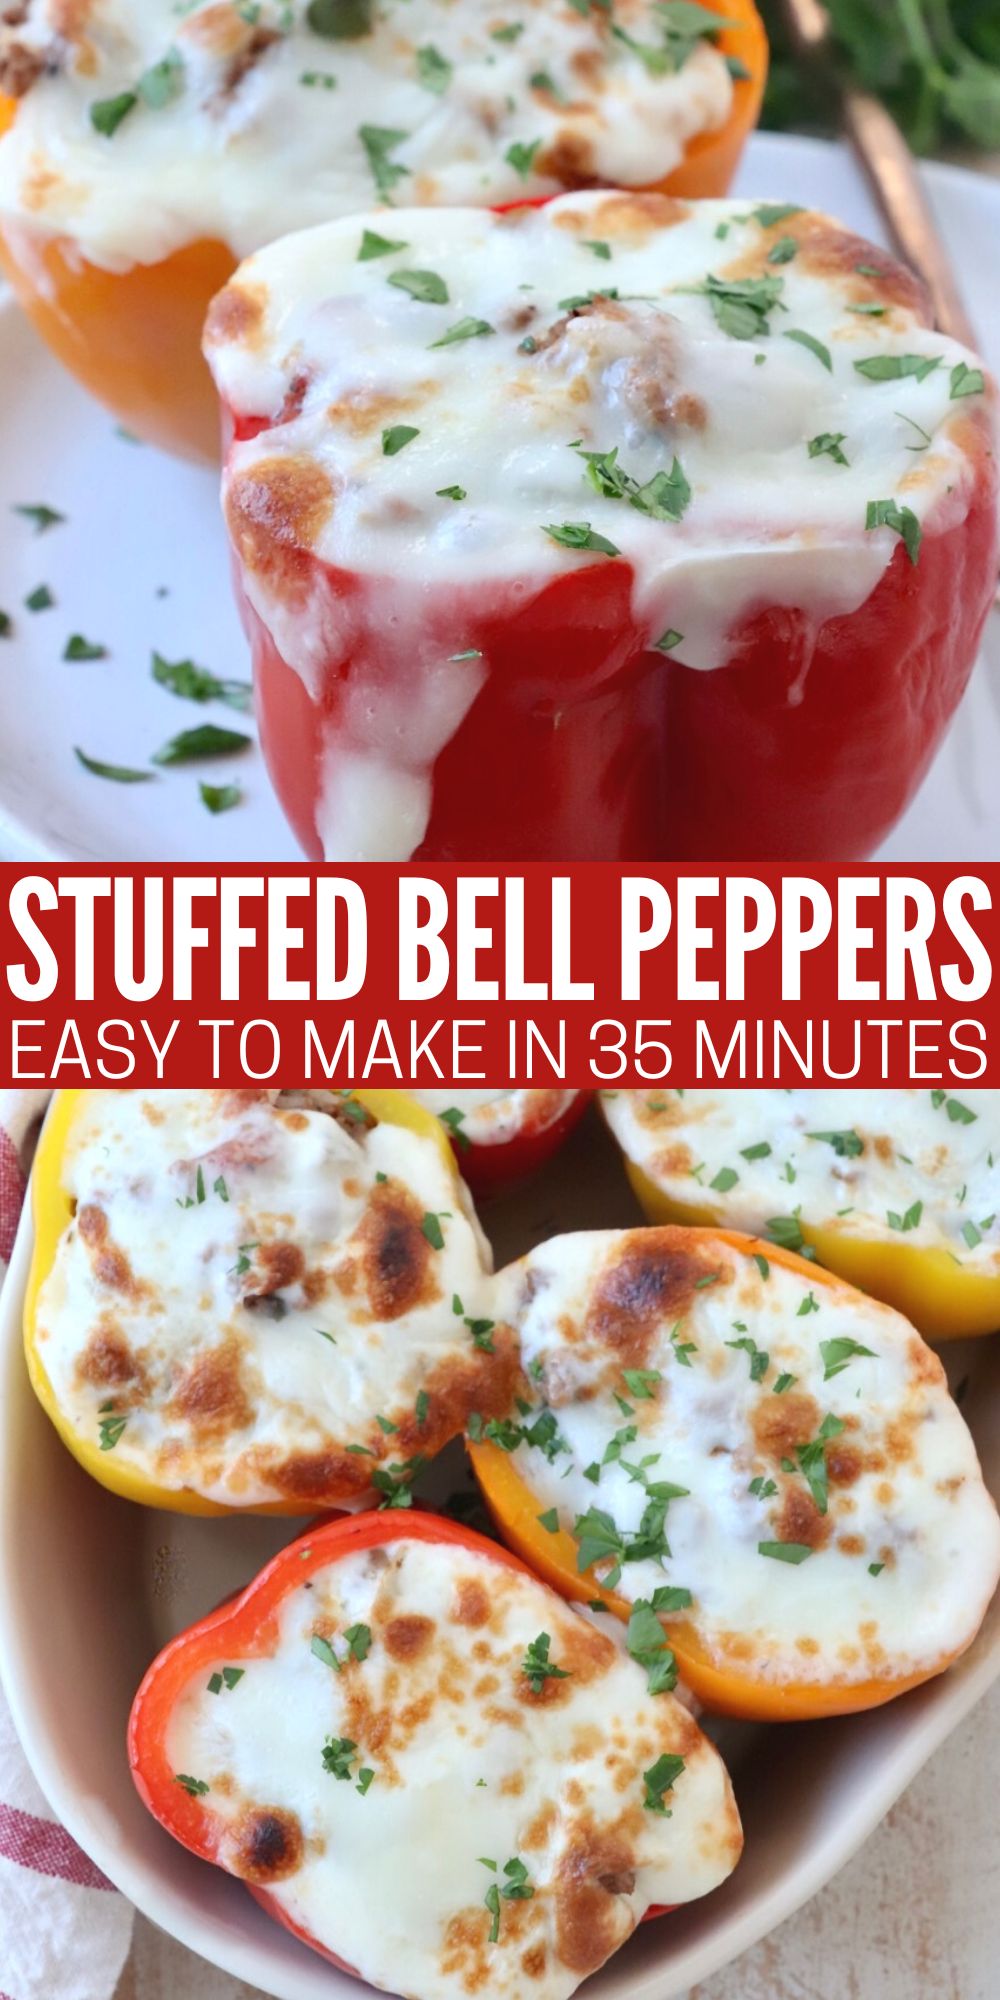 Easy Stuffed Bell Peppers Recipe - WhitneyBond.com